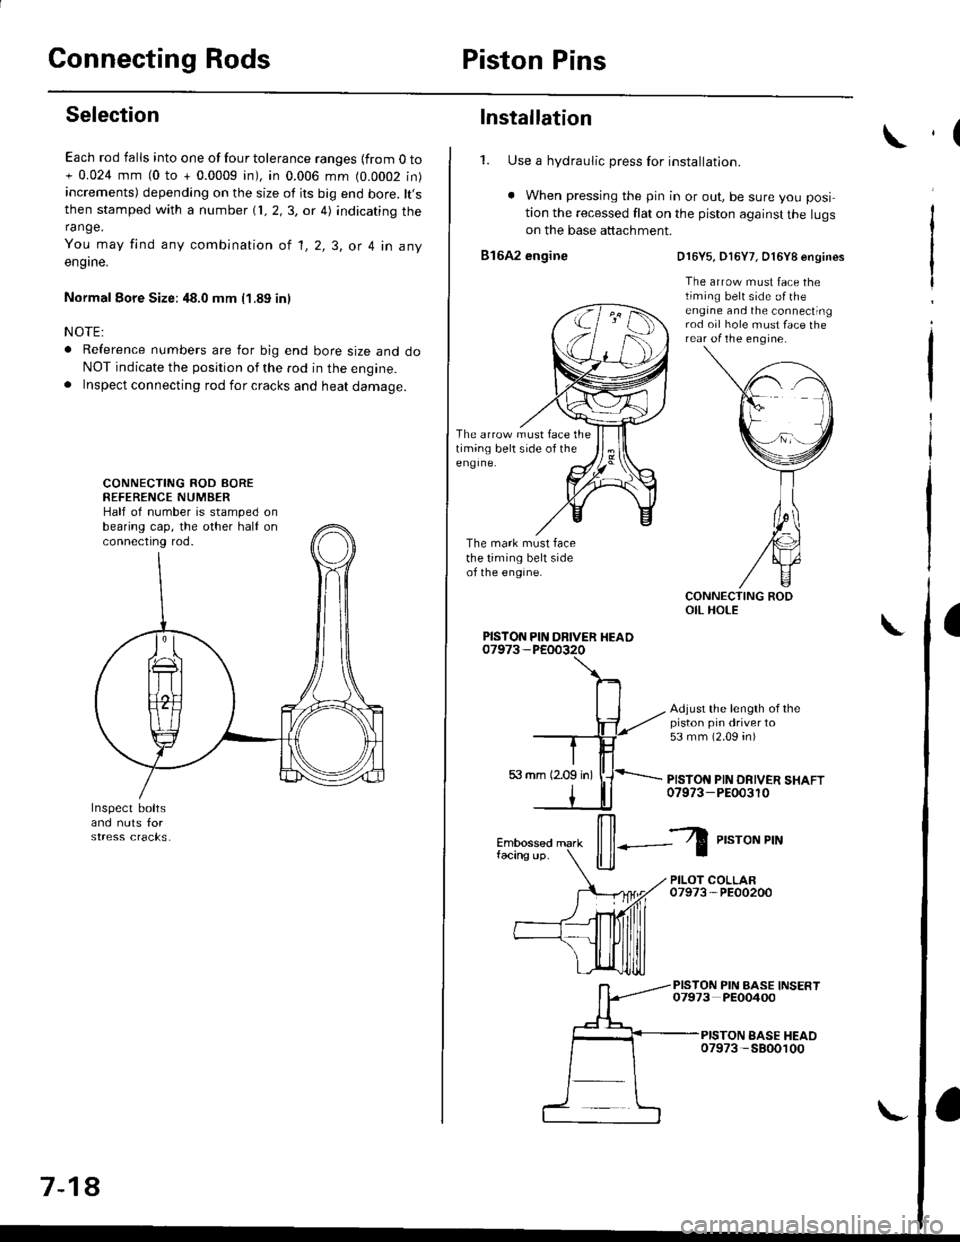 HONDA CIVIC 1998 6.G Workshop Manual Connecting RodsPiston Pins
Selection
Each rod falls into one of four tolerance ranges {from O to+ 0.024 mm (0 to + 0.0009 in), in 0.006 mm (0.0002 in)increments) depending on the size of its big end b